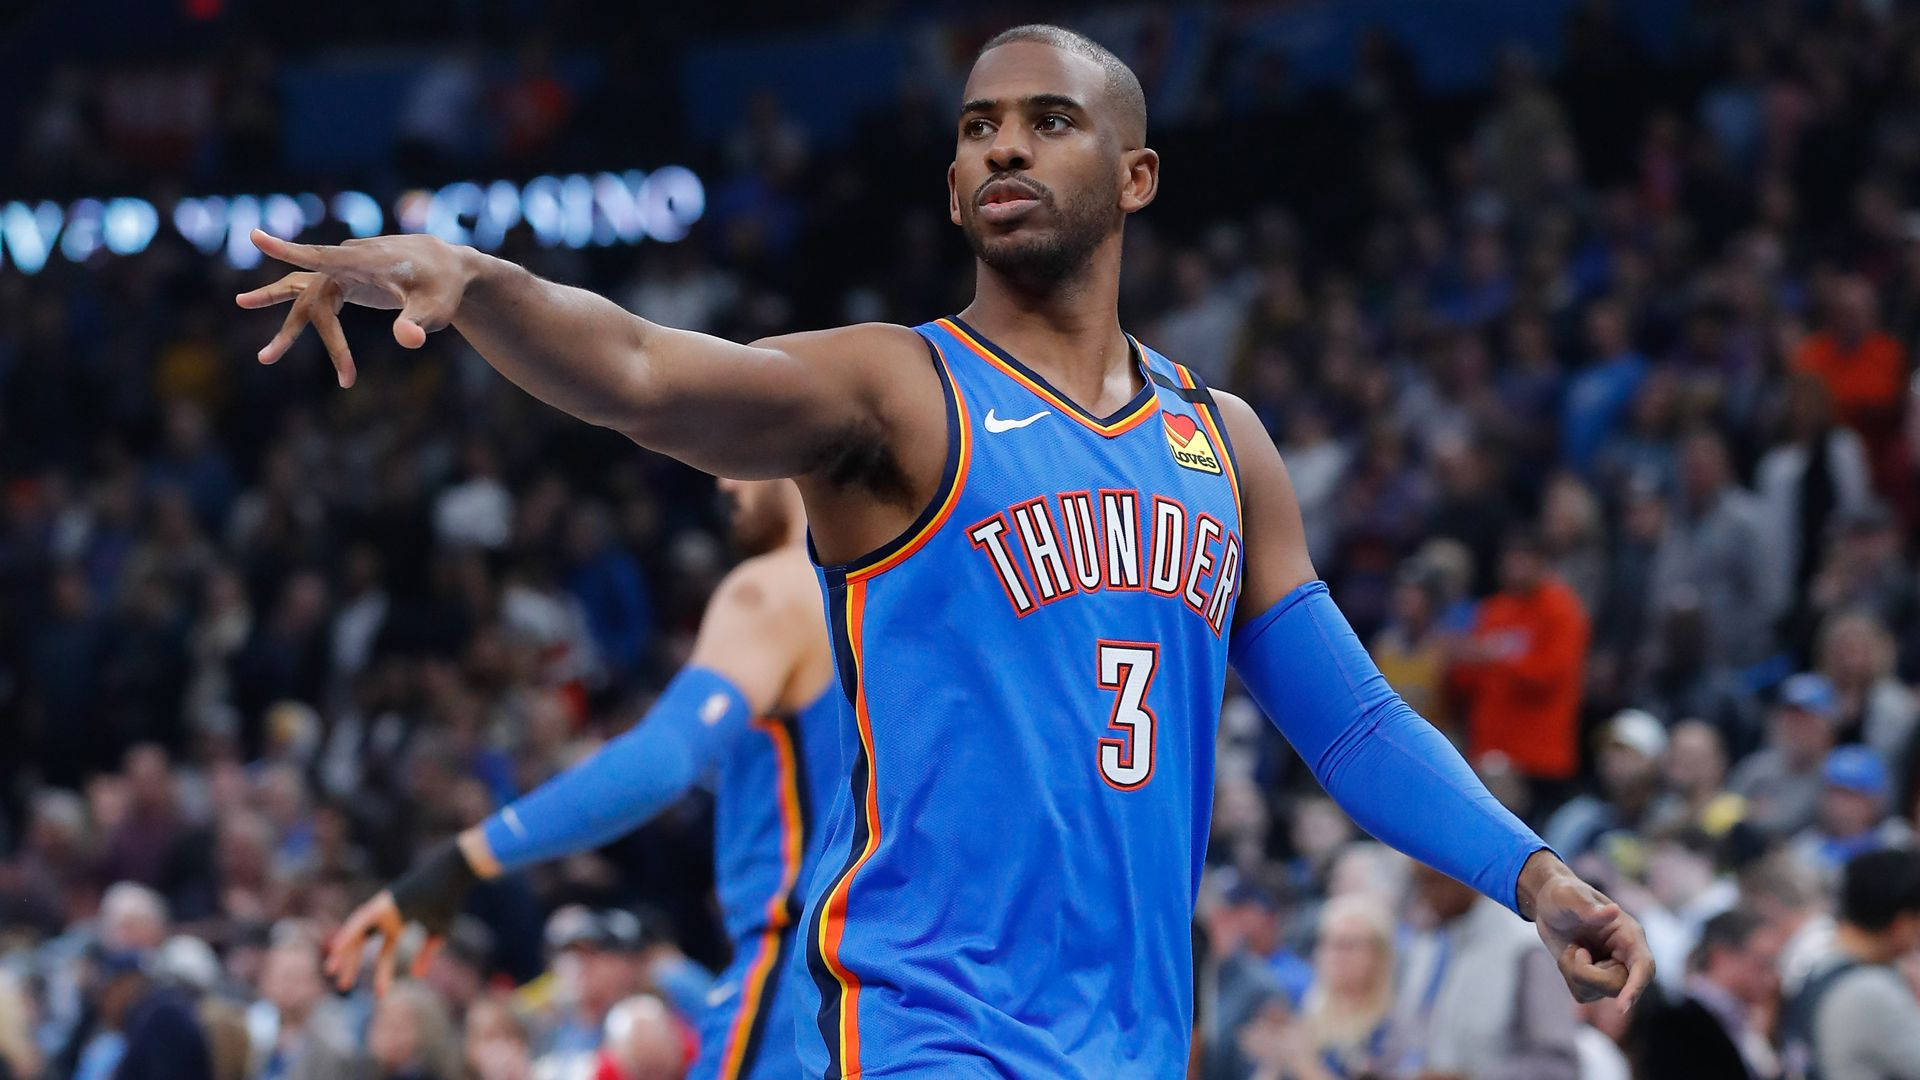 Chris Paul 1920X1080 Wallpaper and Background Image